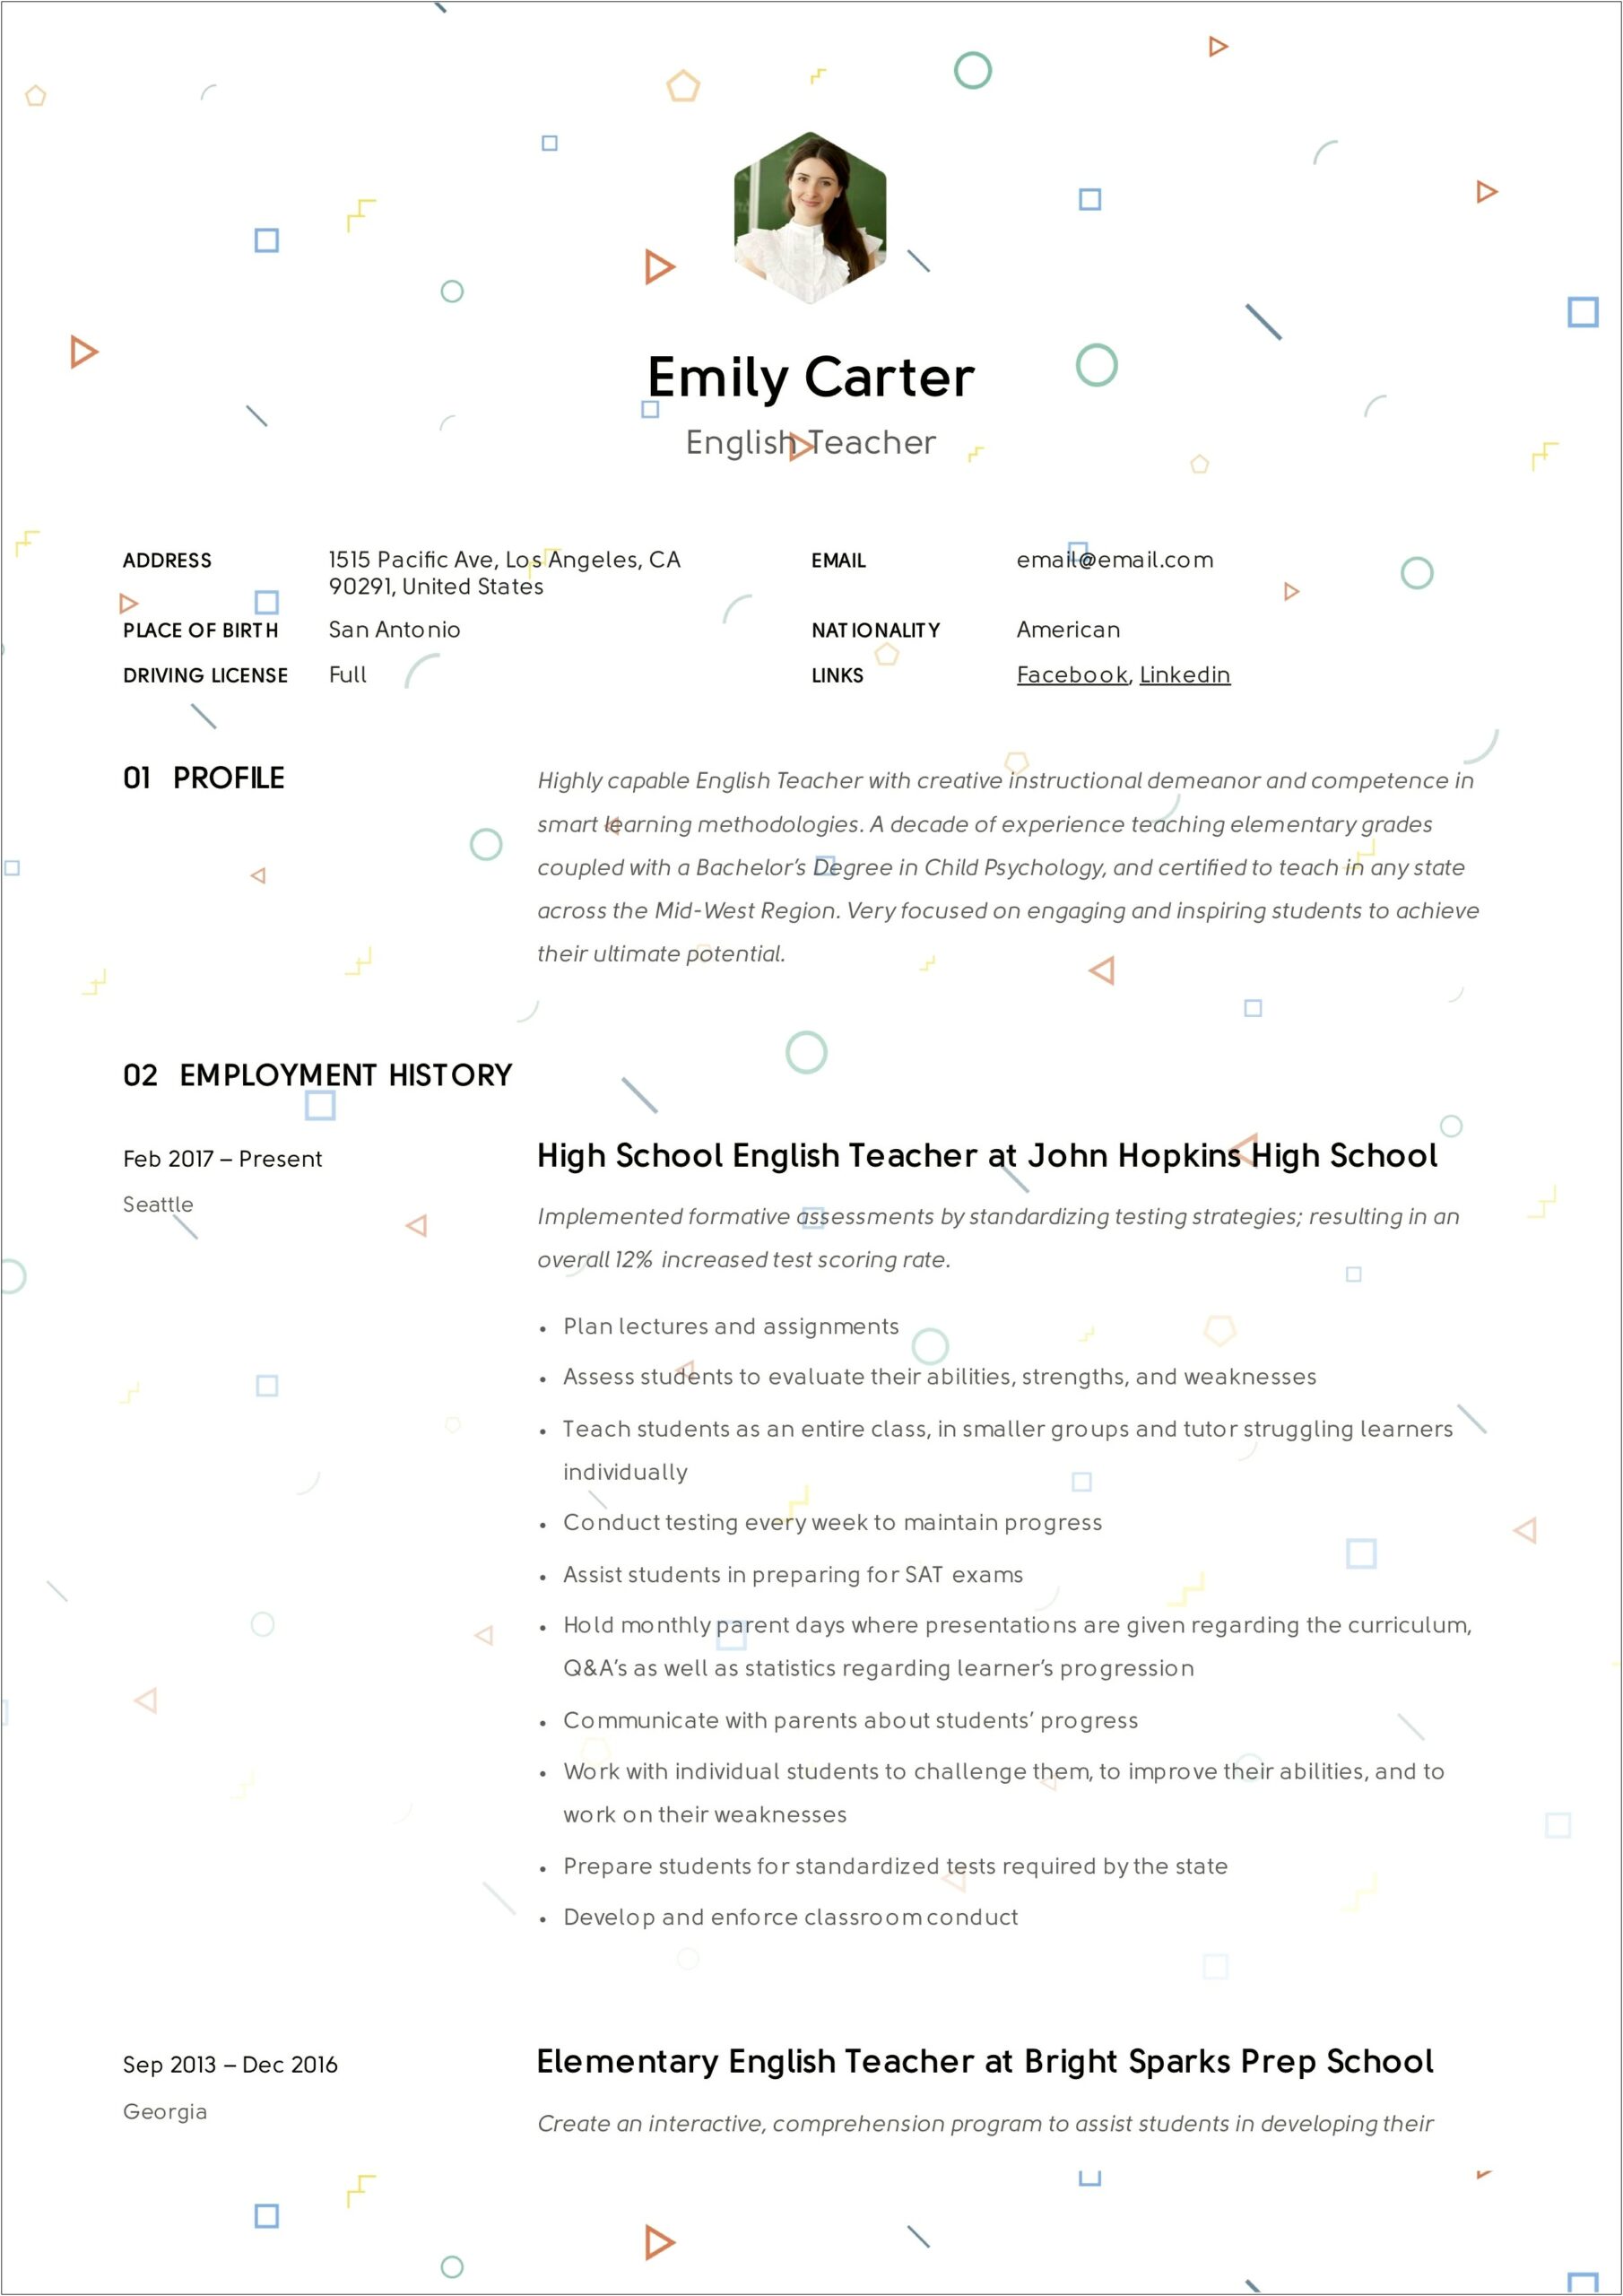 Sample Resume For Indian Law Student